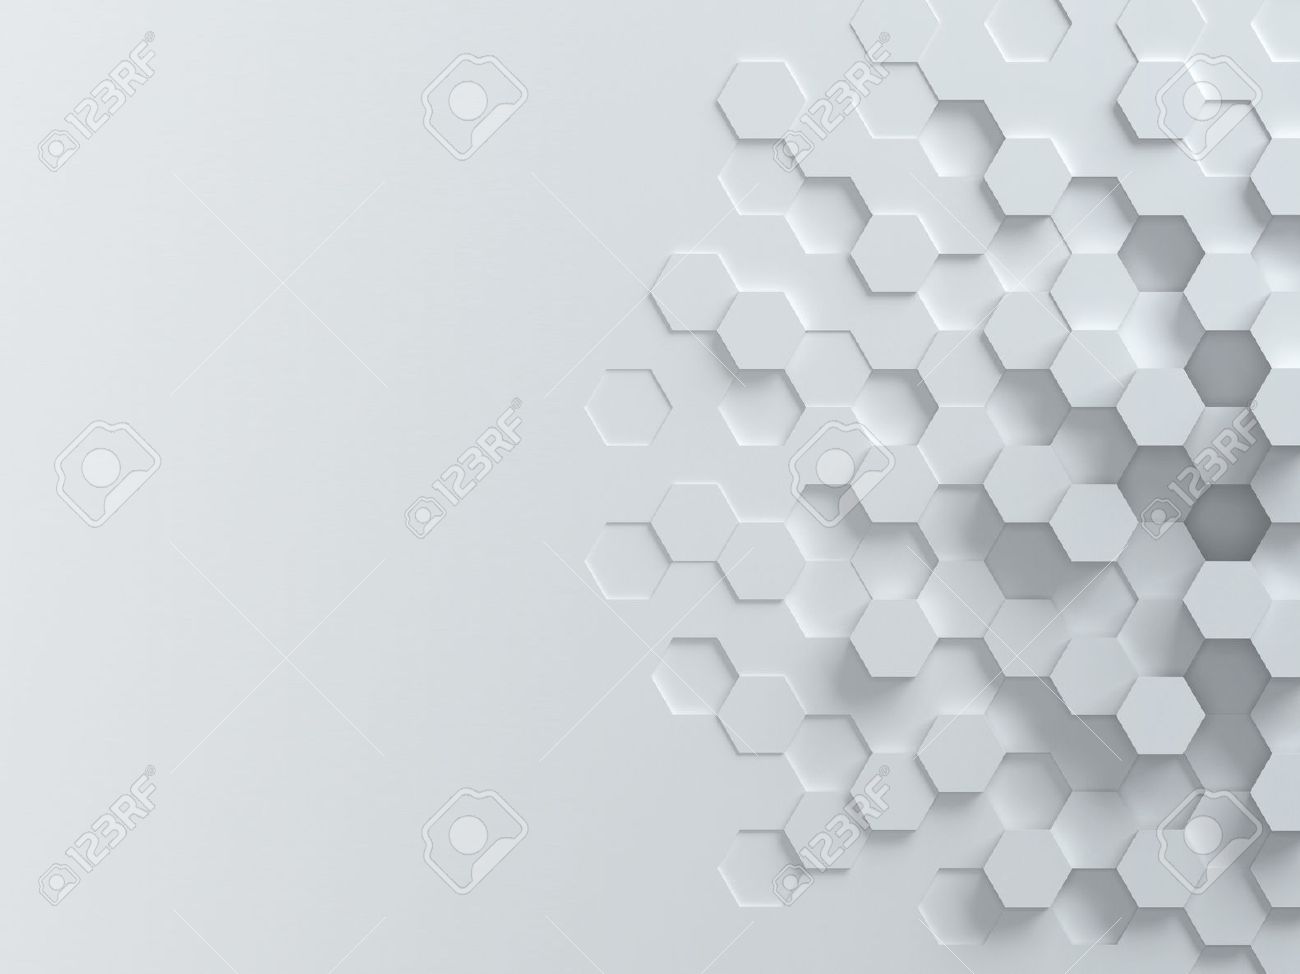 Hexagonal Abstract 3d Background Stock Photo Picture And Royalty